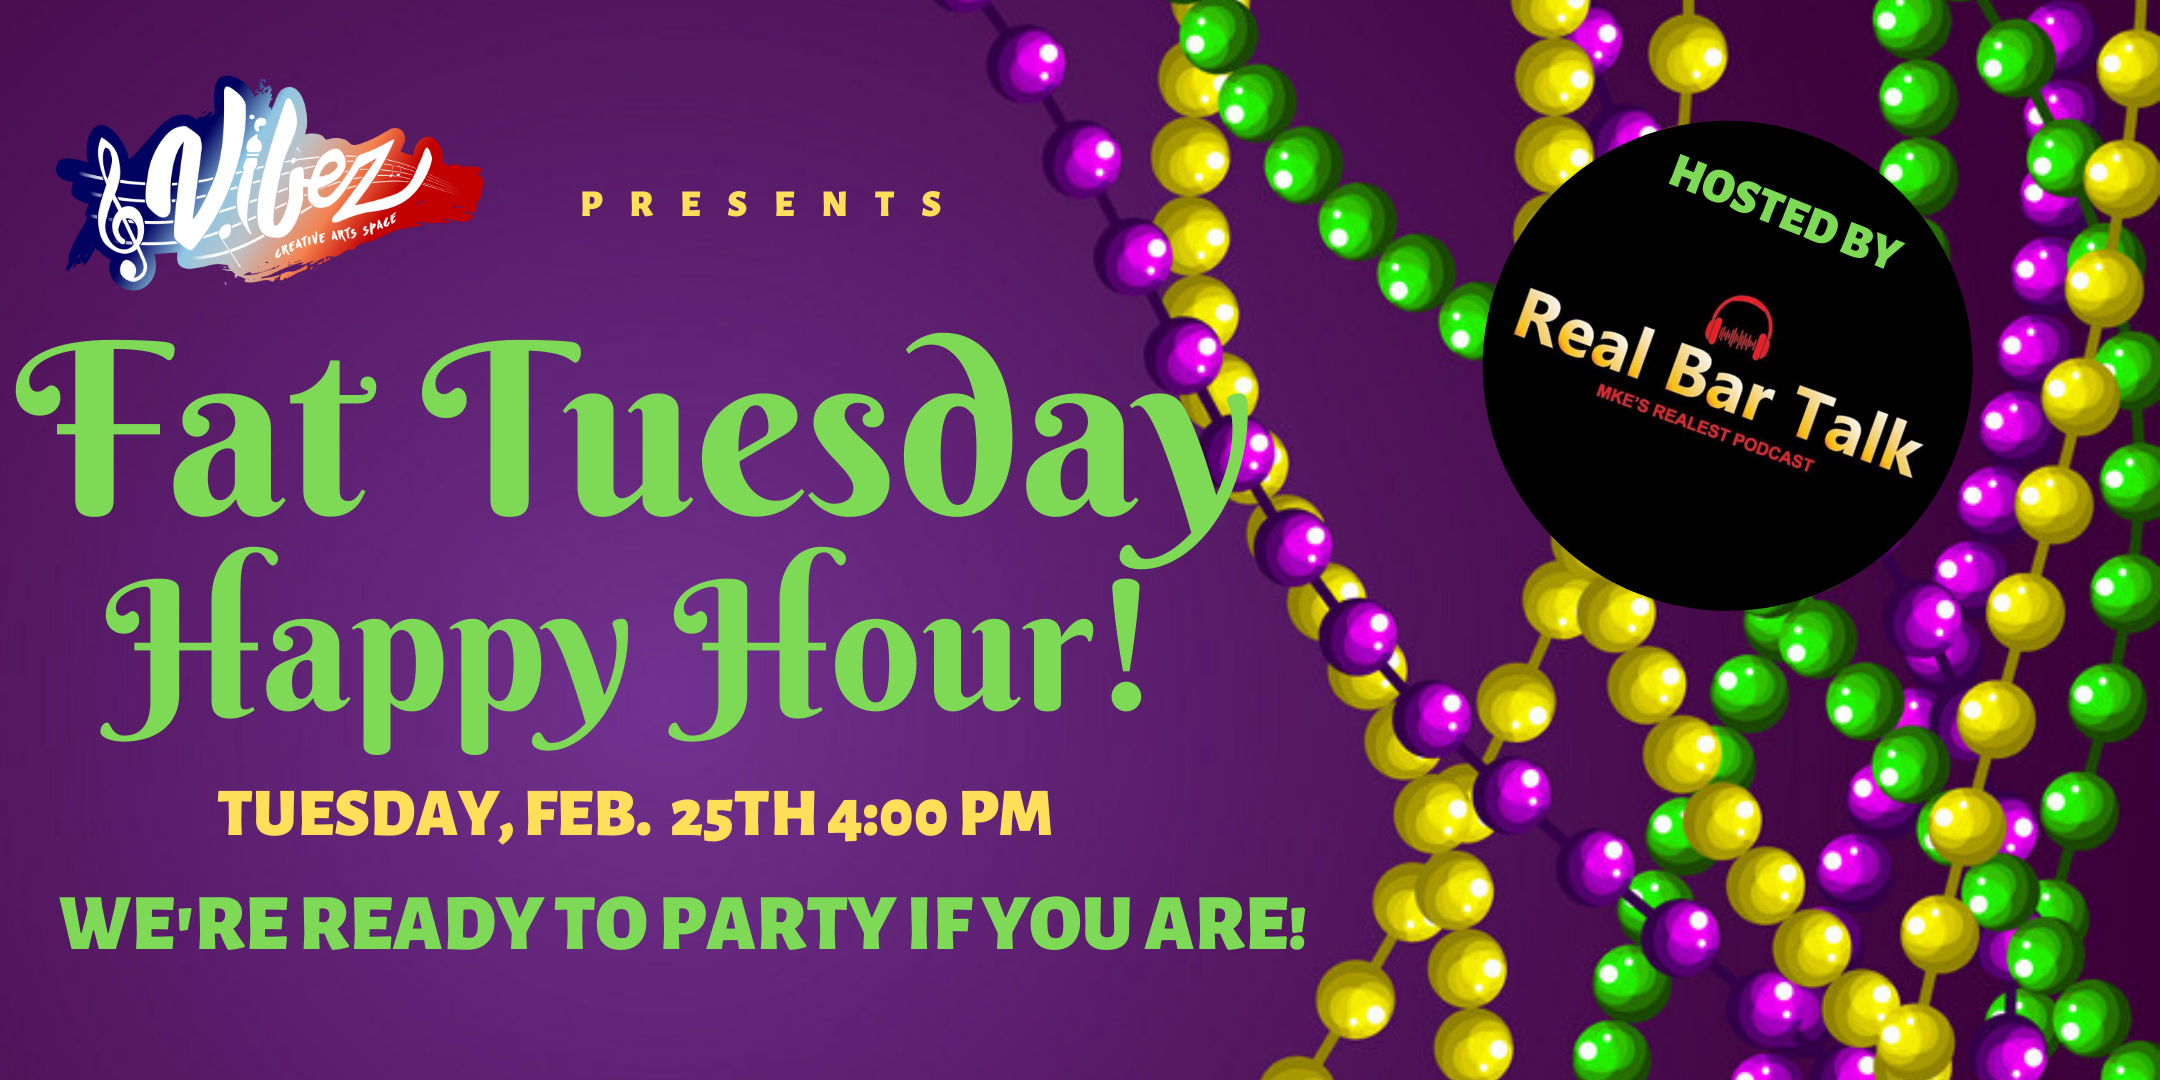 Fat Tuesday Happy Hour!